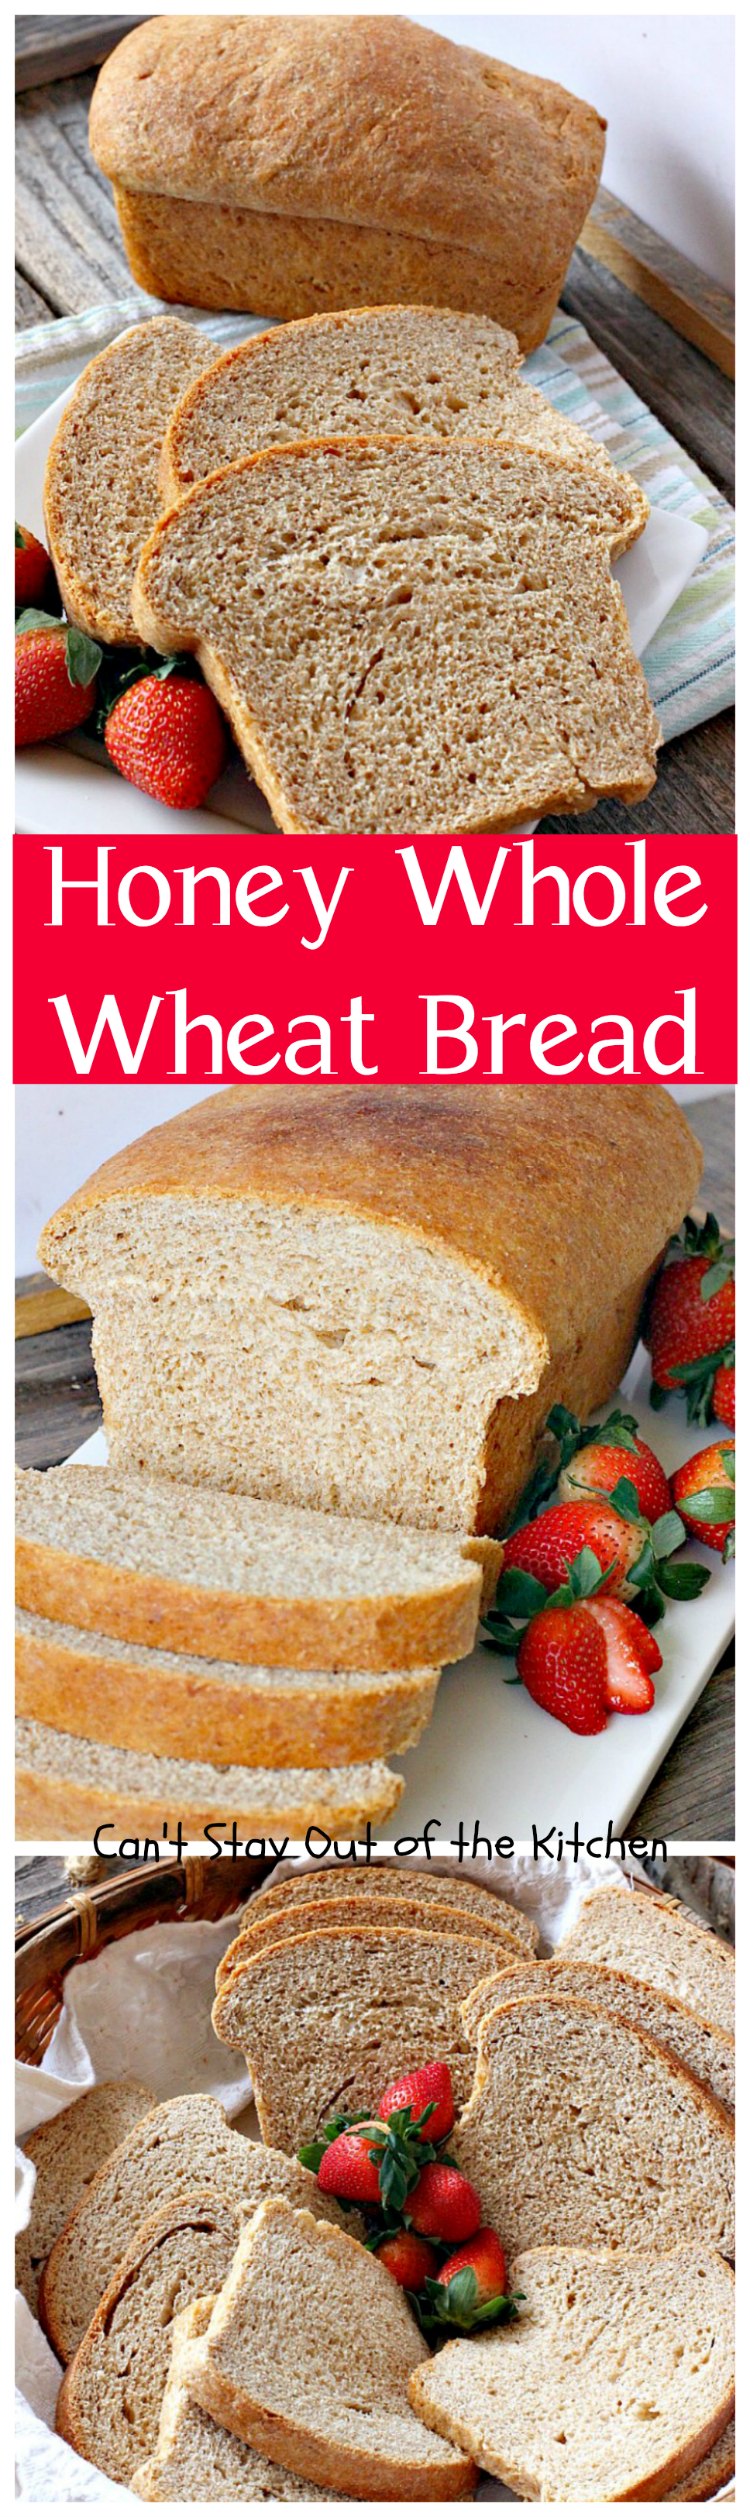 Honey Whole Wheat Bread | Can't Stay Out of the Kitchen